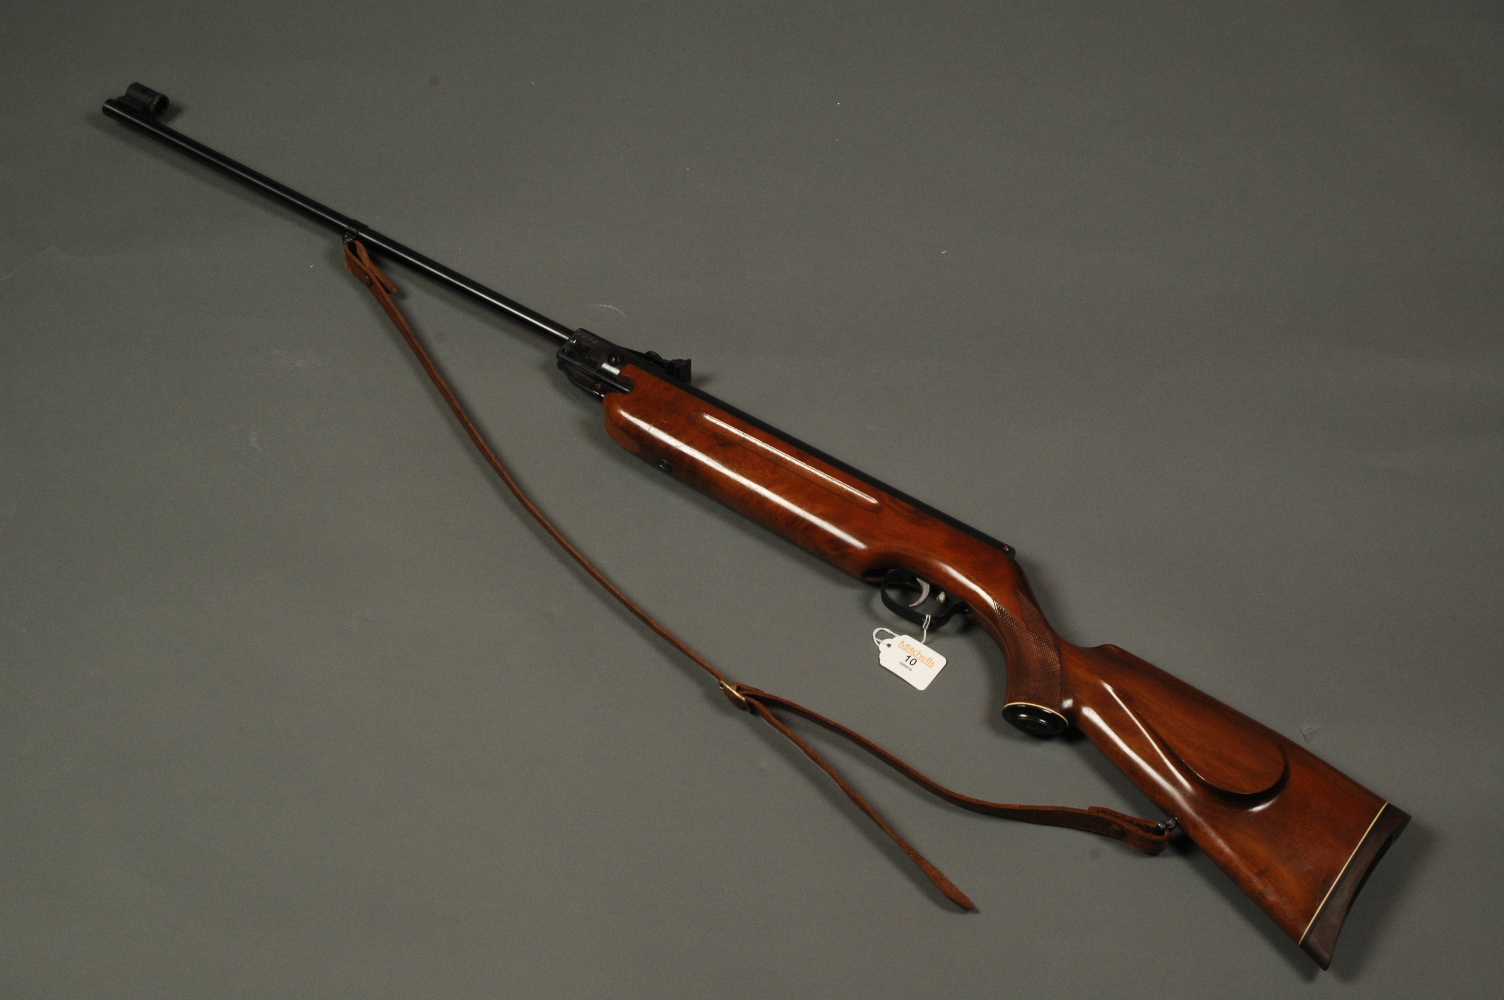 Weirhrauch HW35 .22 break barrel air rifle, 22 inch barrel, fitted with leather sling.  Serial No.